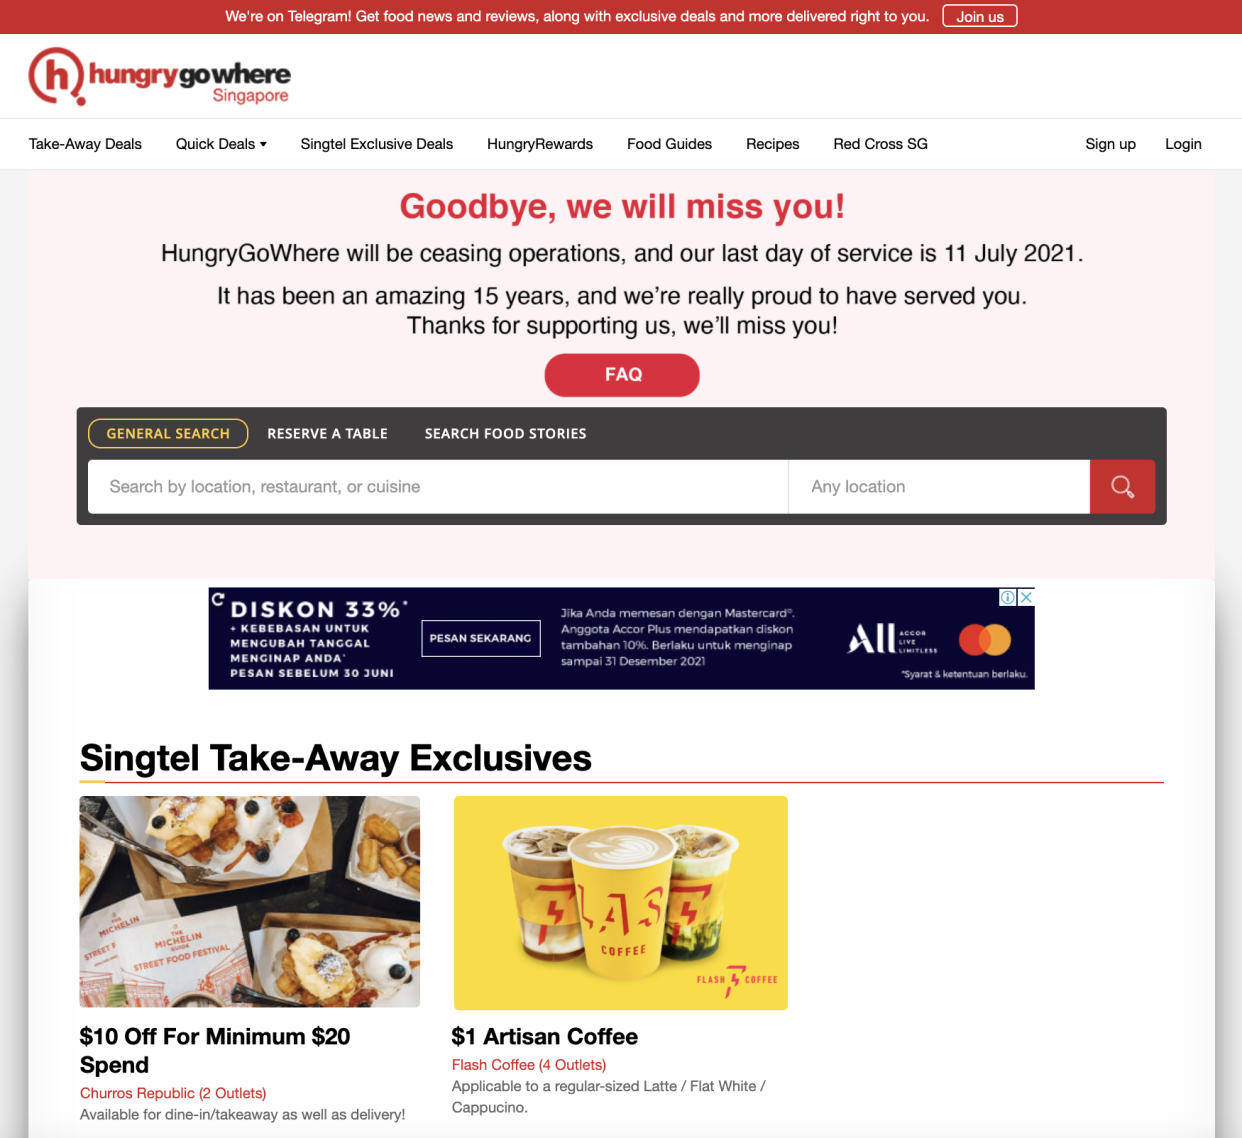 HungryGoWhere site to cease operations. (PHOTO: Screenshot of HungryGoWhere website)